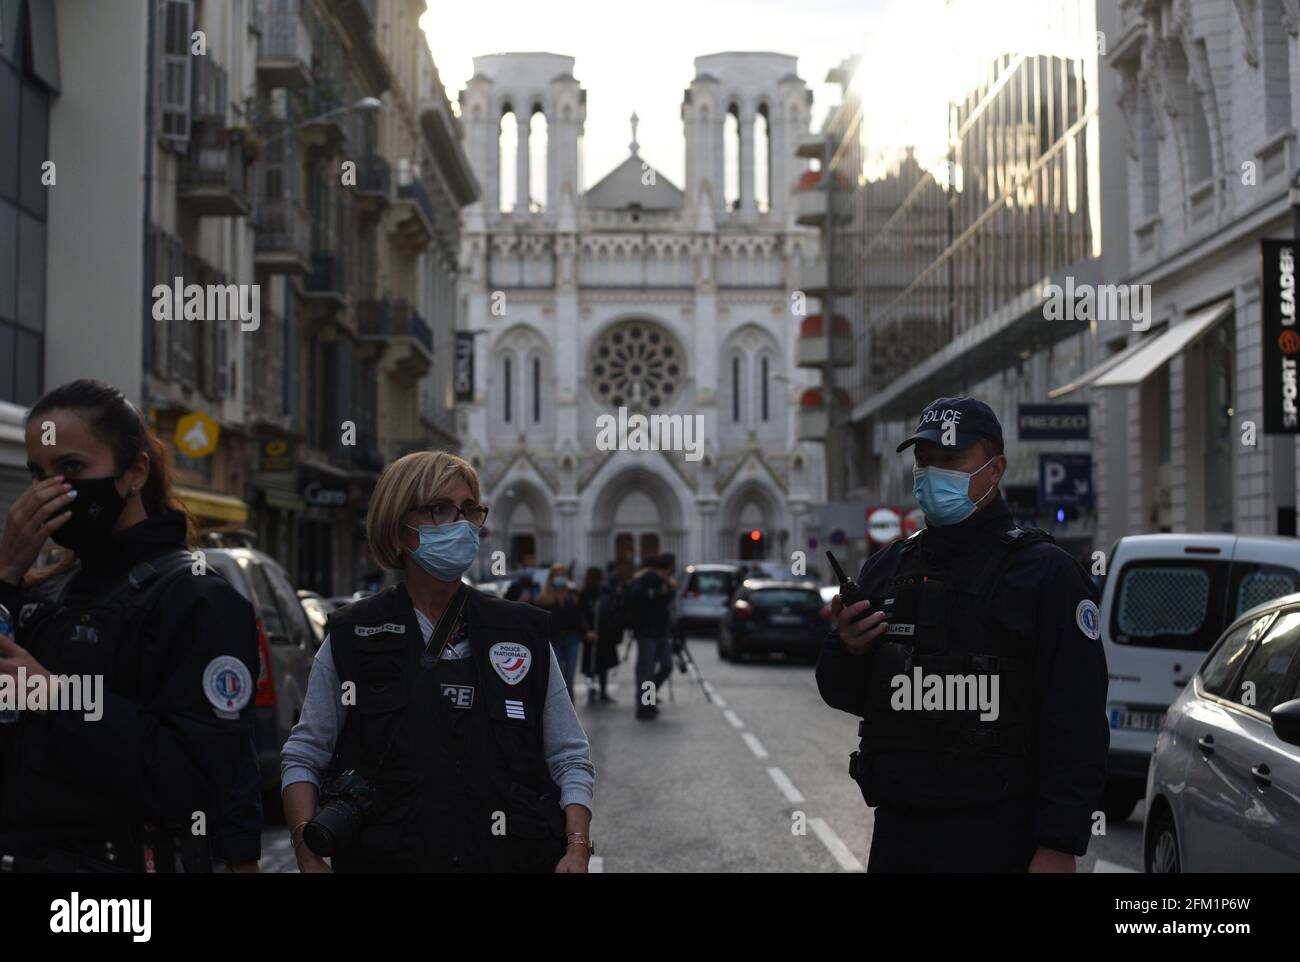 *** STRICTLY NO SALES TO FRENCH MEDIA OR PUBLISHERS - RIGHTS RESERVED ***October 29, 2020 - Nice, France: French police guard the street leading to Notre-Dame basilica, where an assailant killed three people in a knife attack. Stock Photo